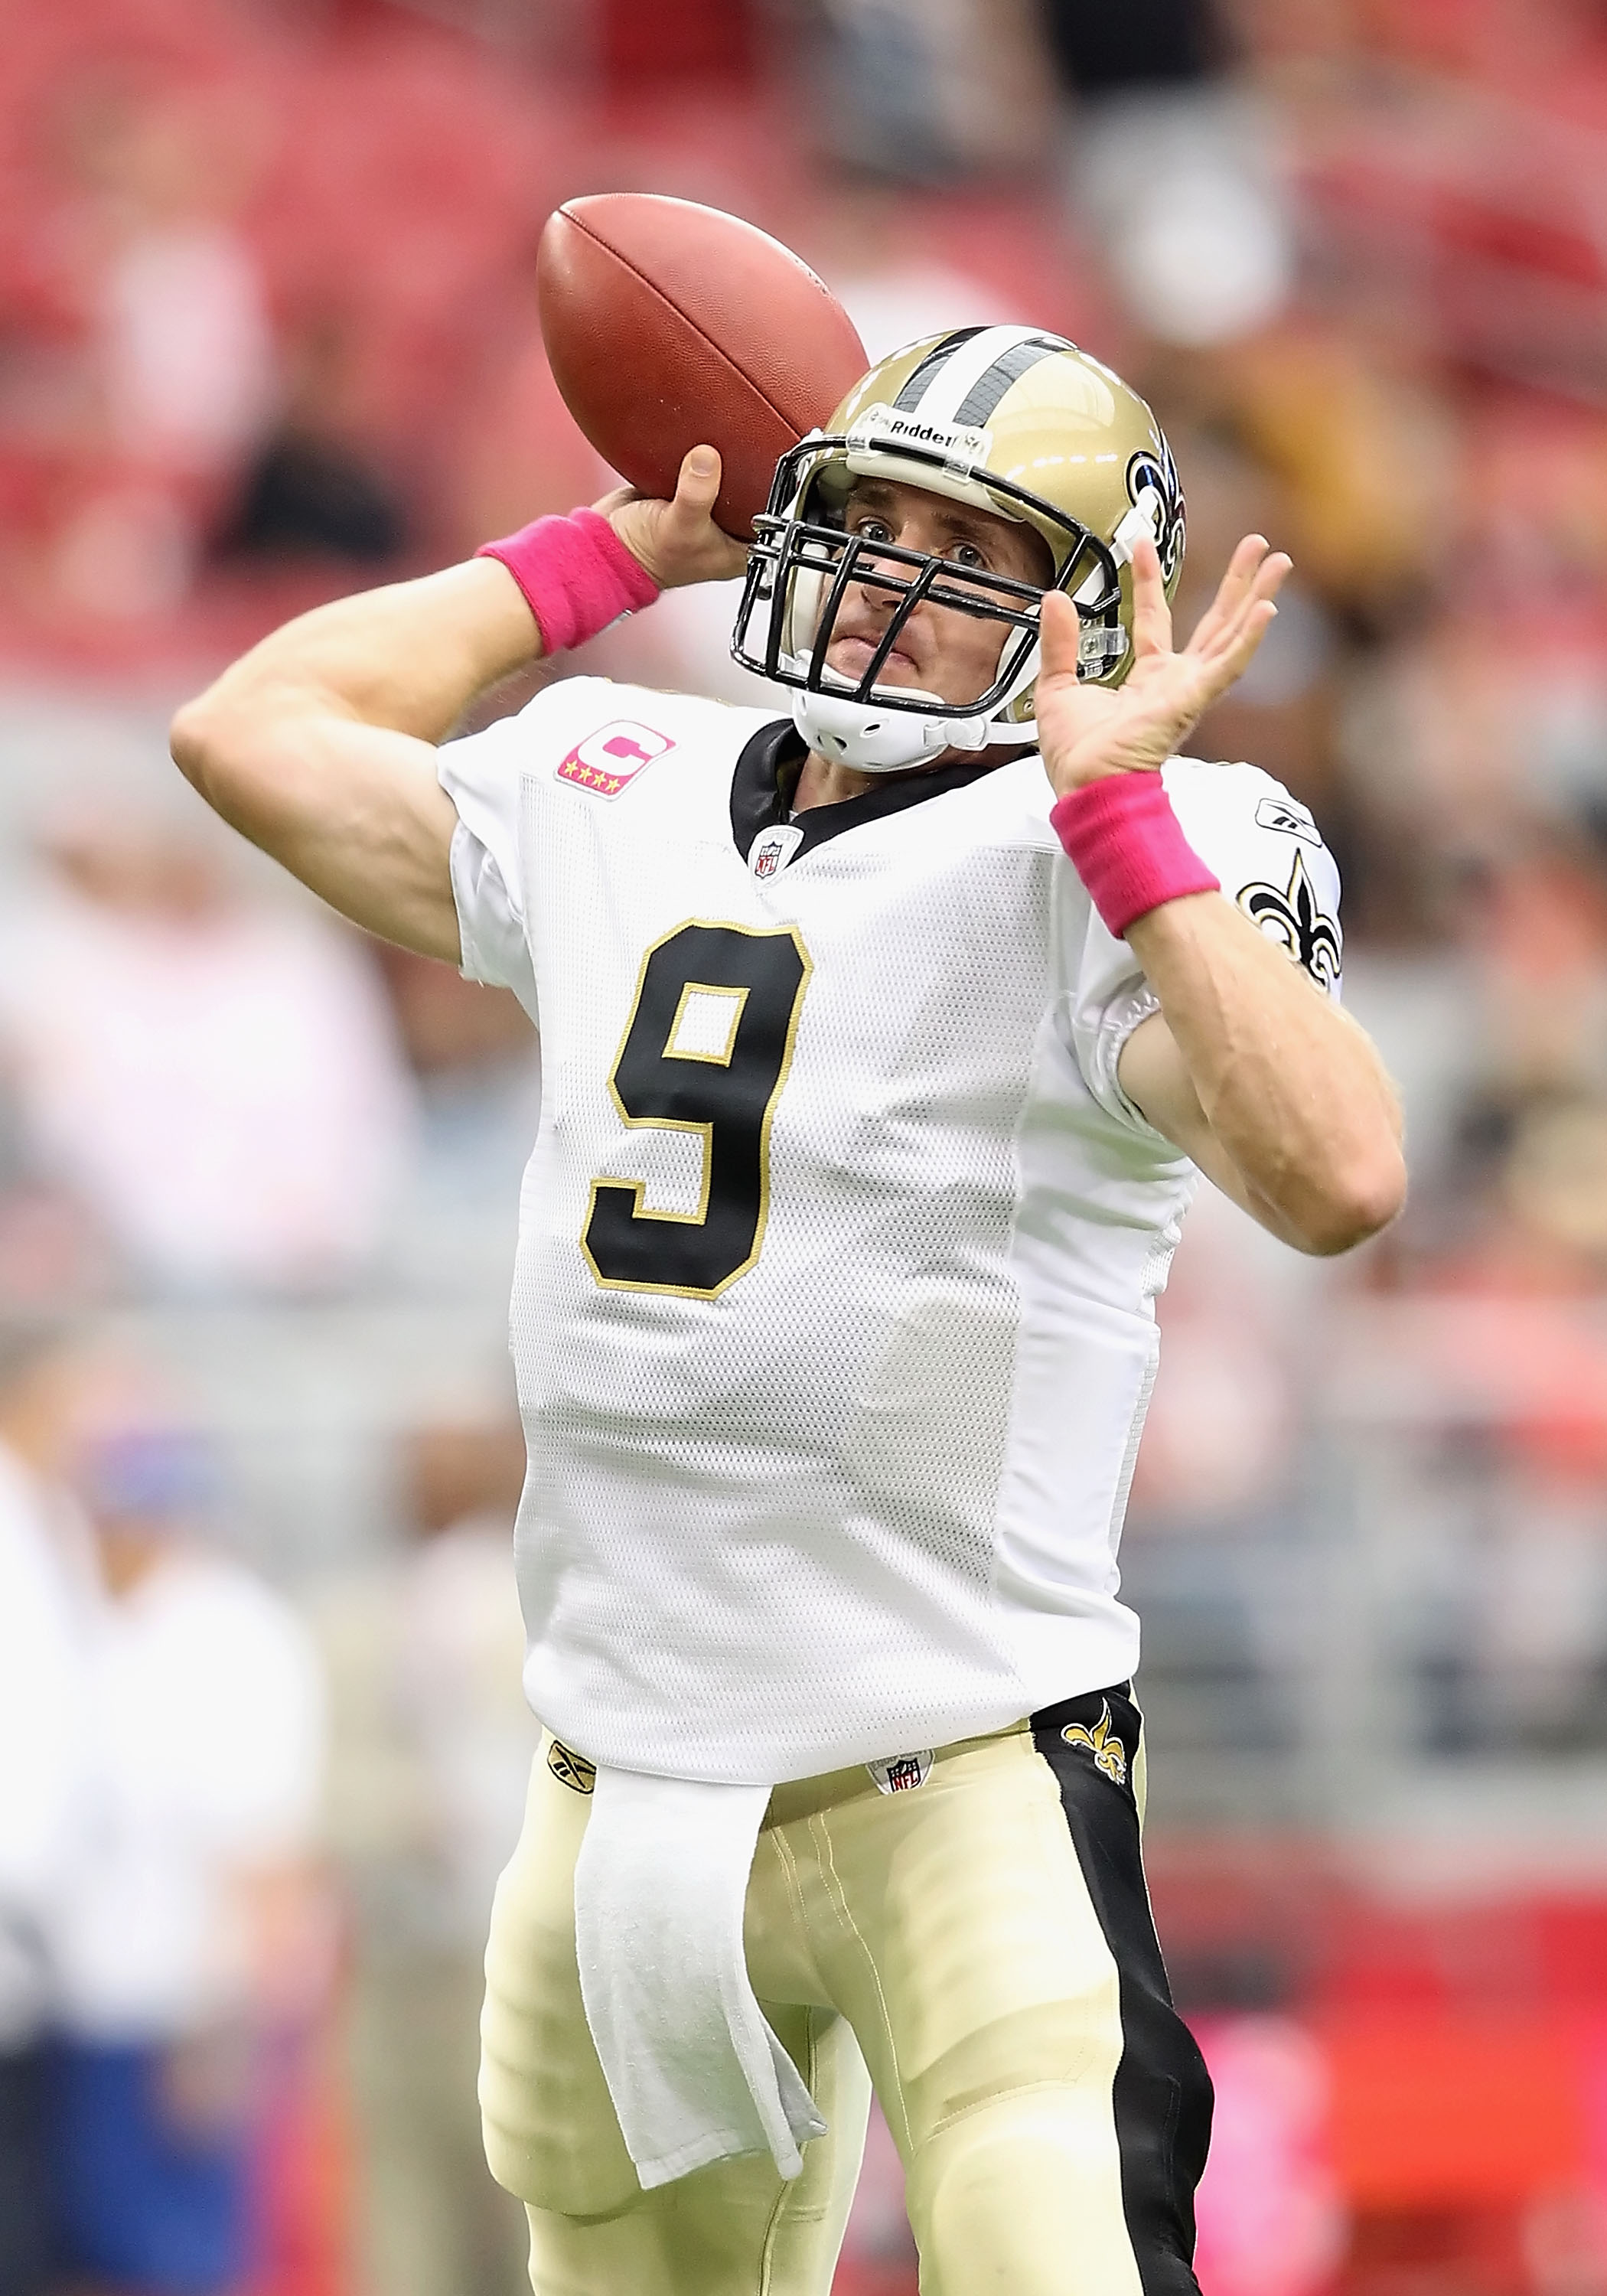 Drew Brees has been one of the league's best since joining the Saints